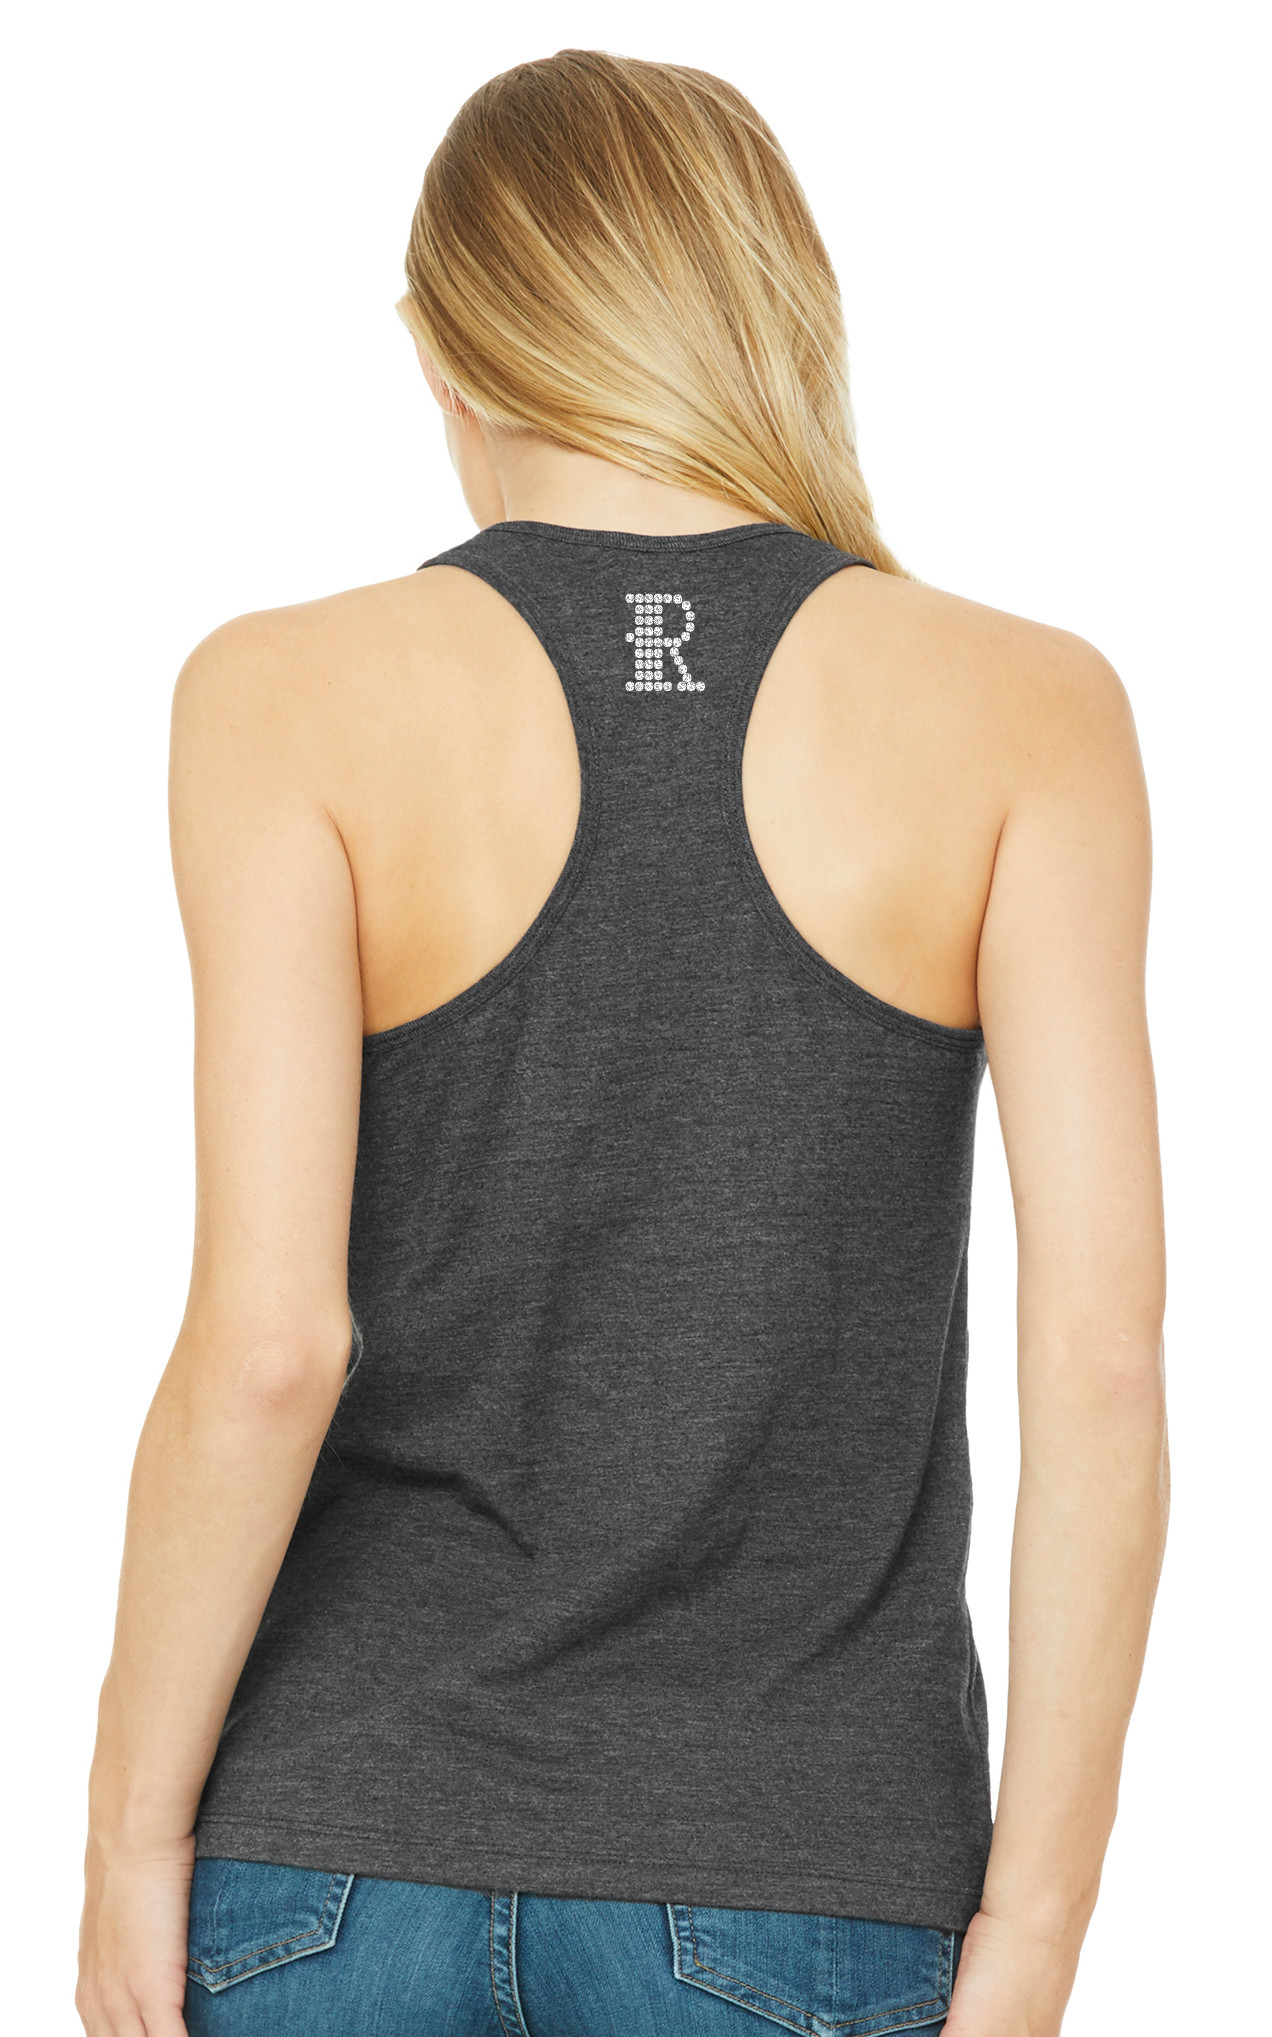 ATTRACO Ribbed Workout Tank Tops for Women with Built in Bra Tight  Racerback Scoop Neck Athletic Top Large Black